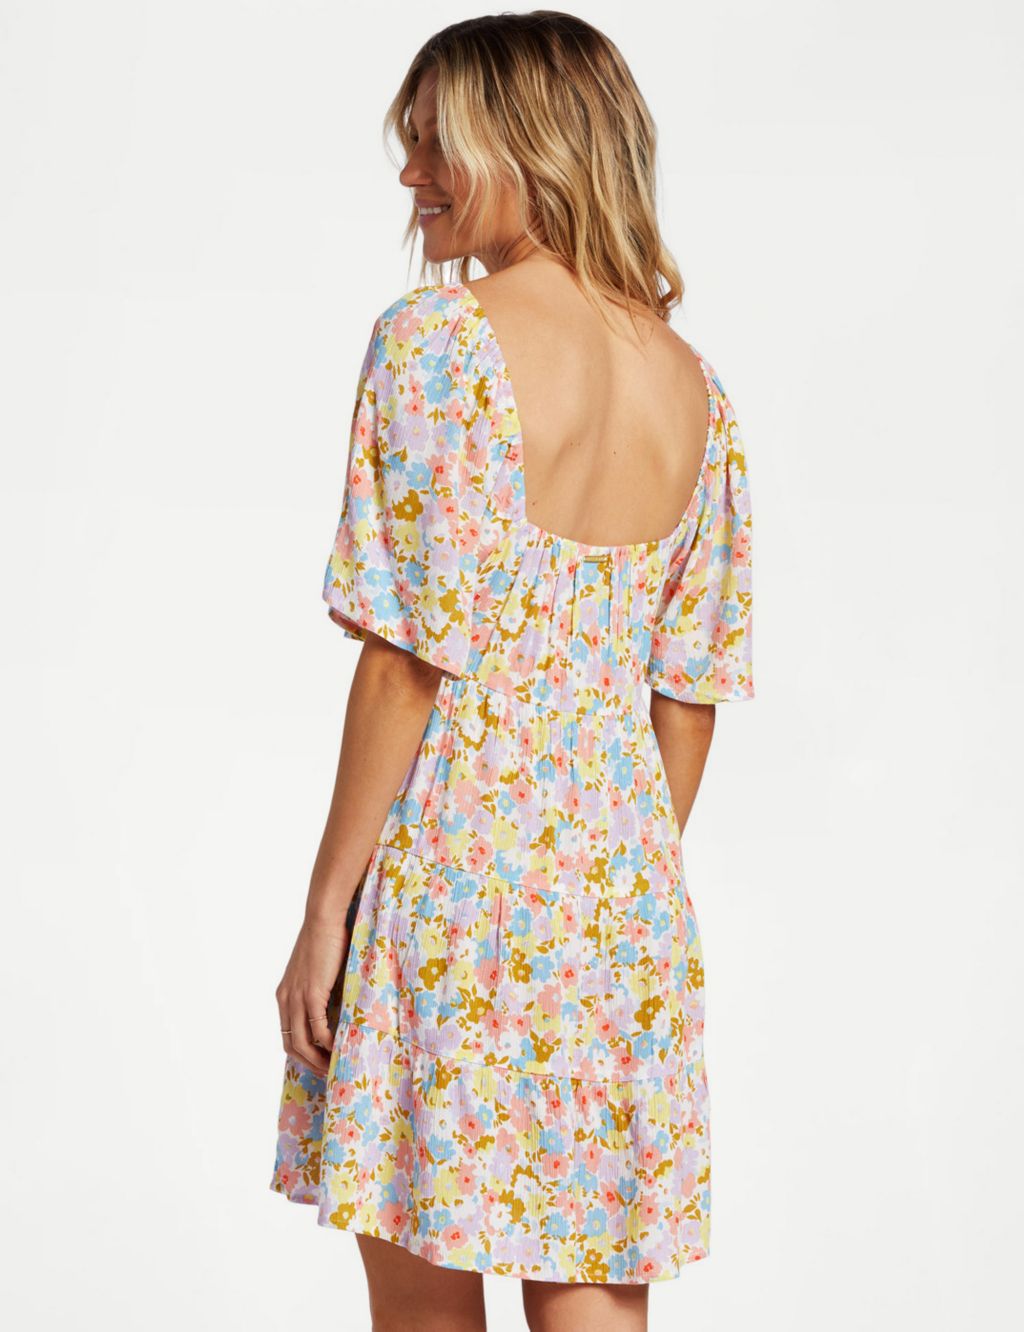 Take A Chance Floral Tiered Mini Dress 4 of 5